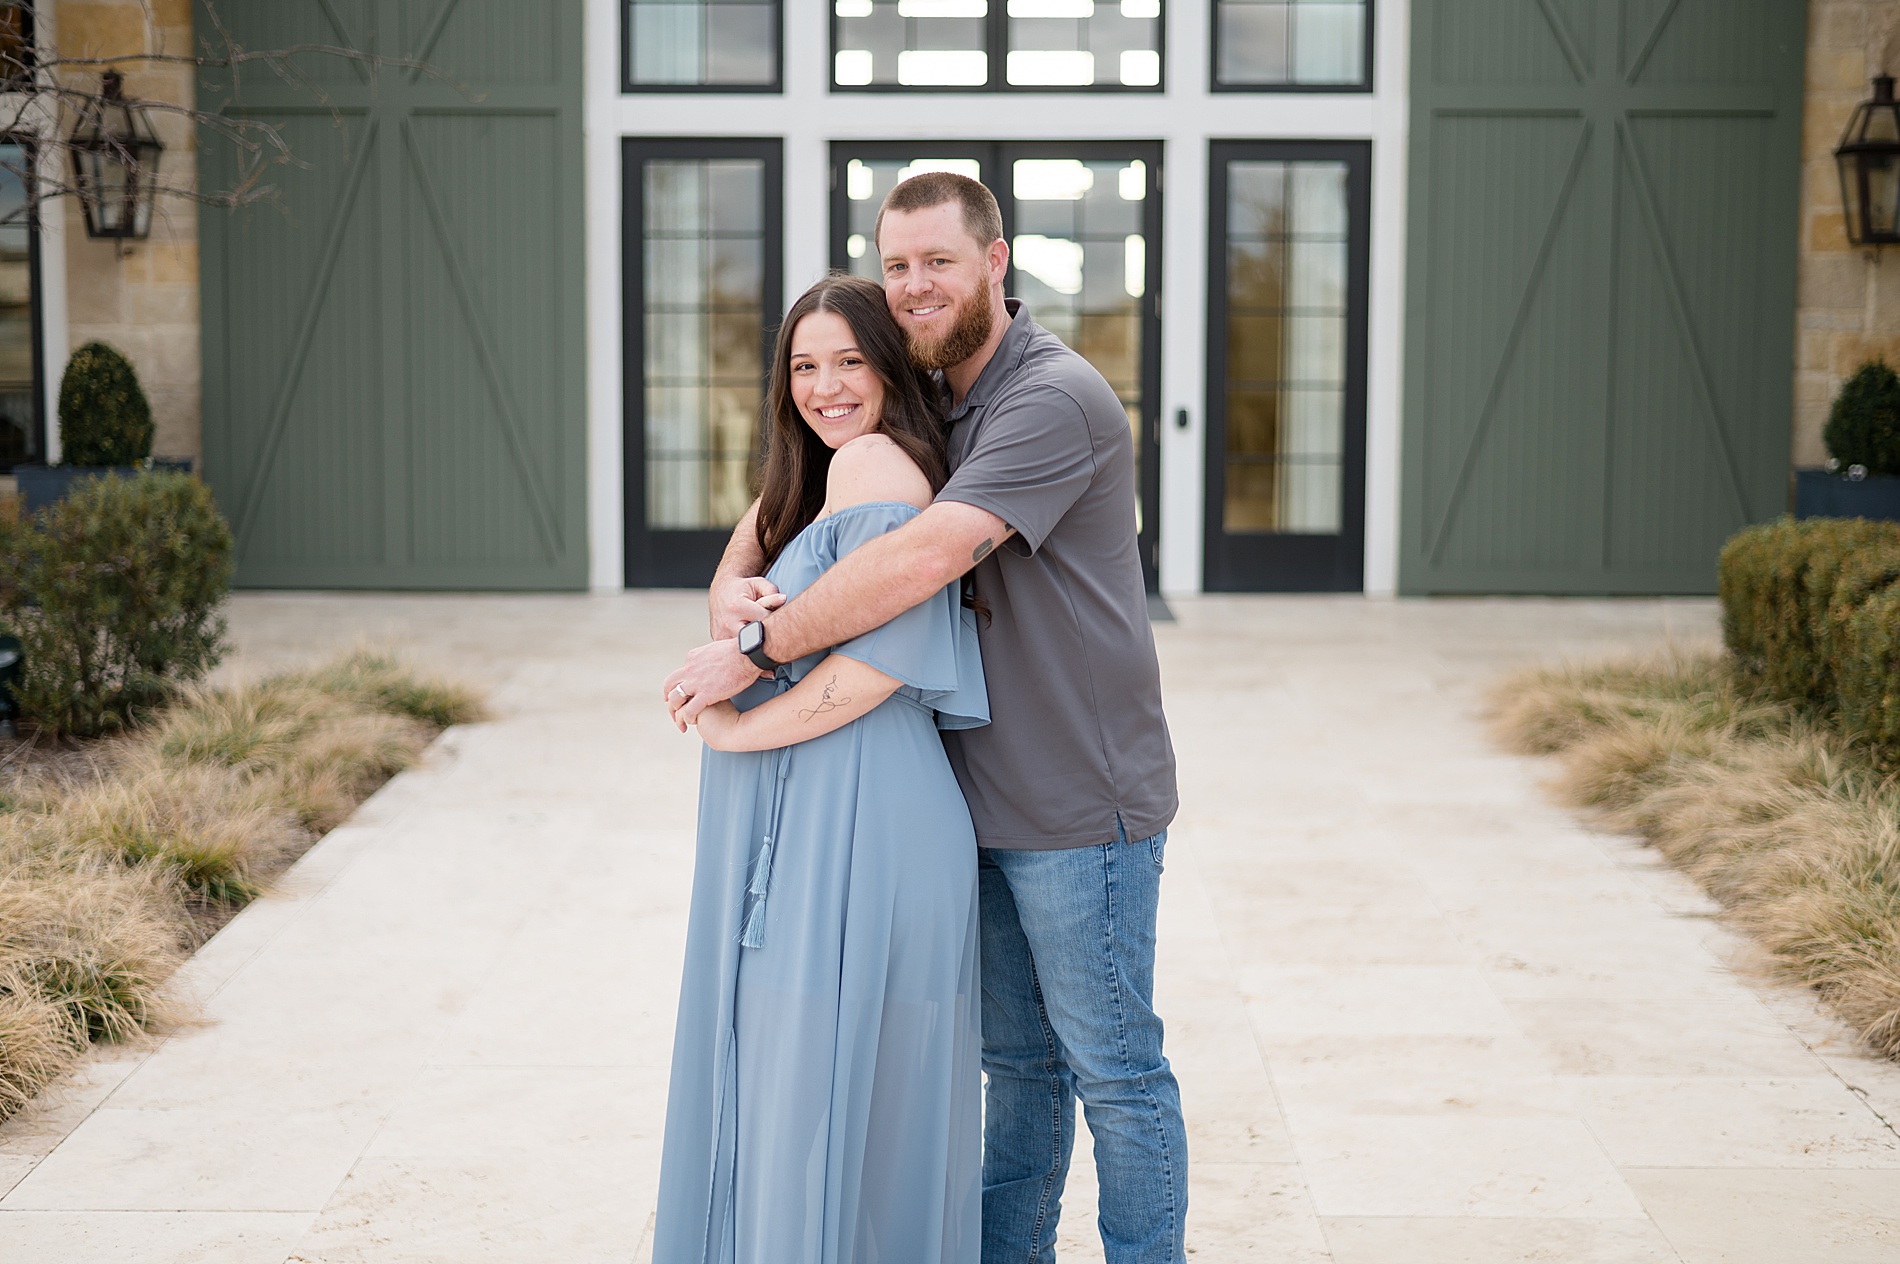 maternity portraits at The Carriage House in Aubrey TX photographed by Lindsey Dutton Photography, a Dallas maternity photographer